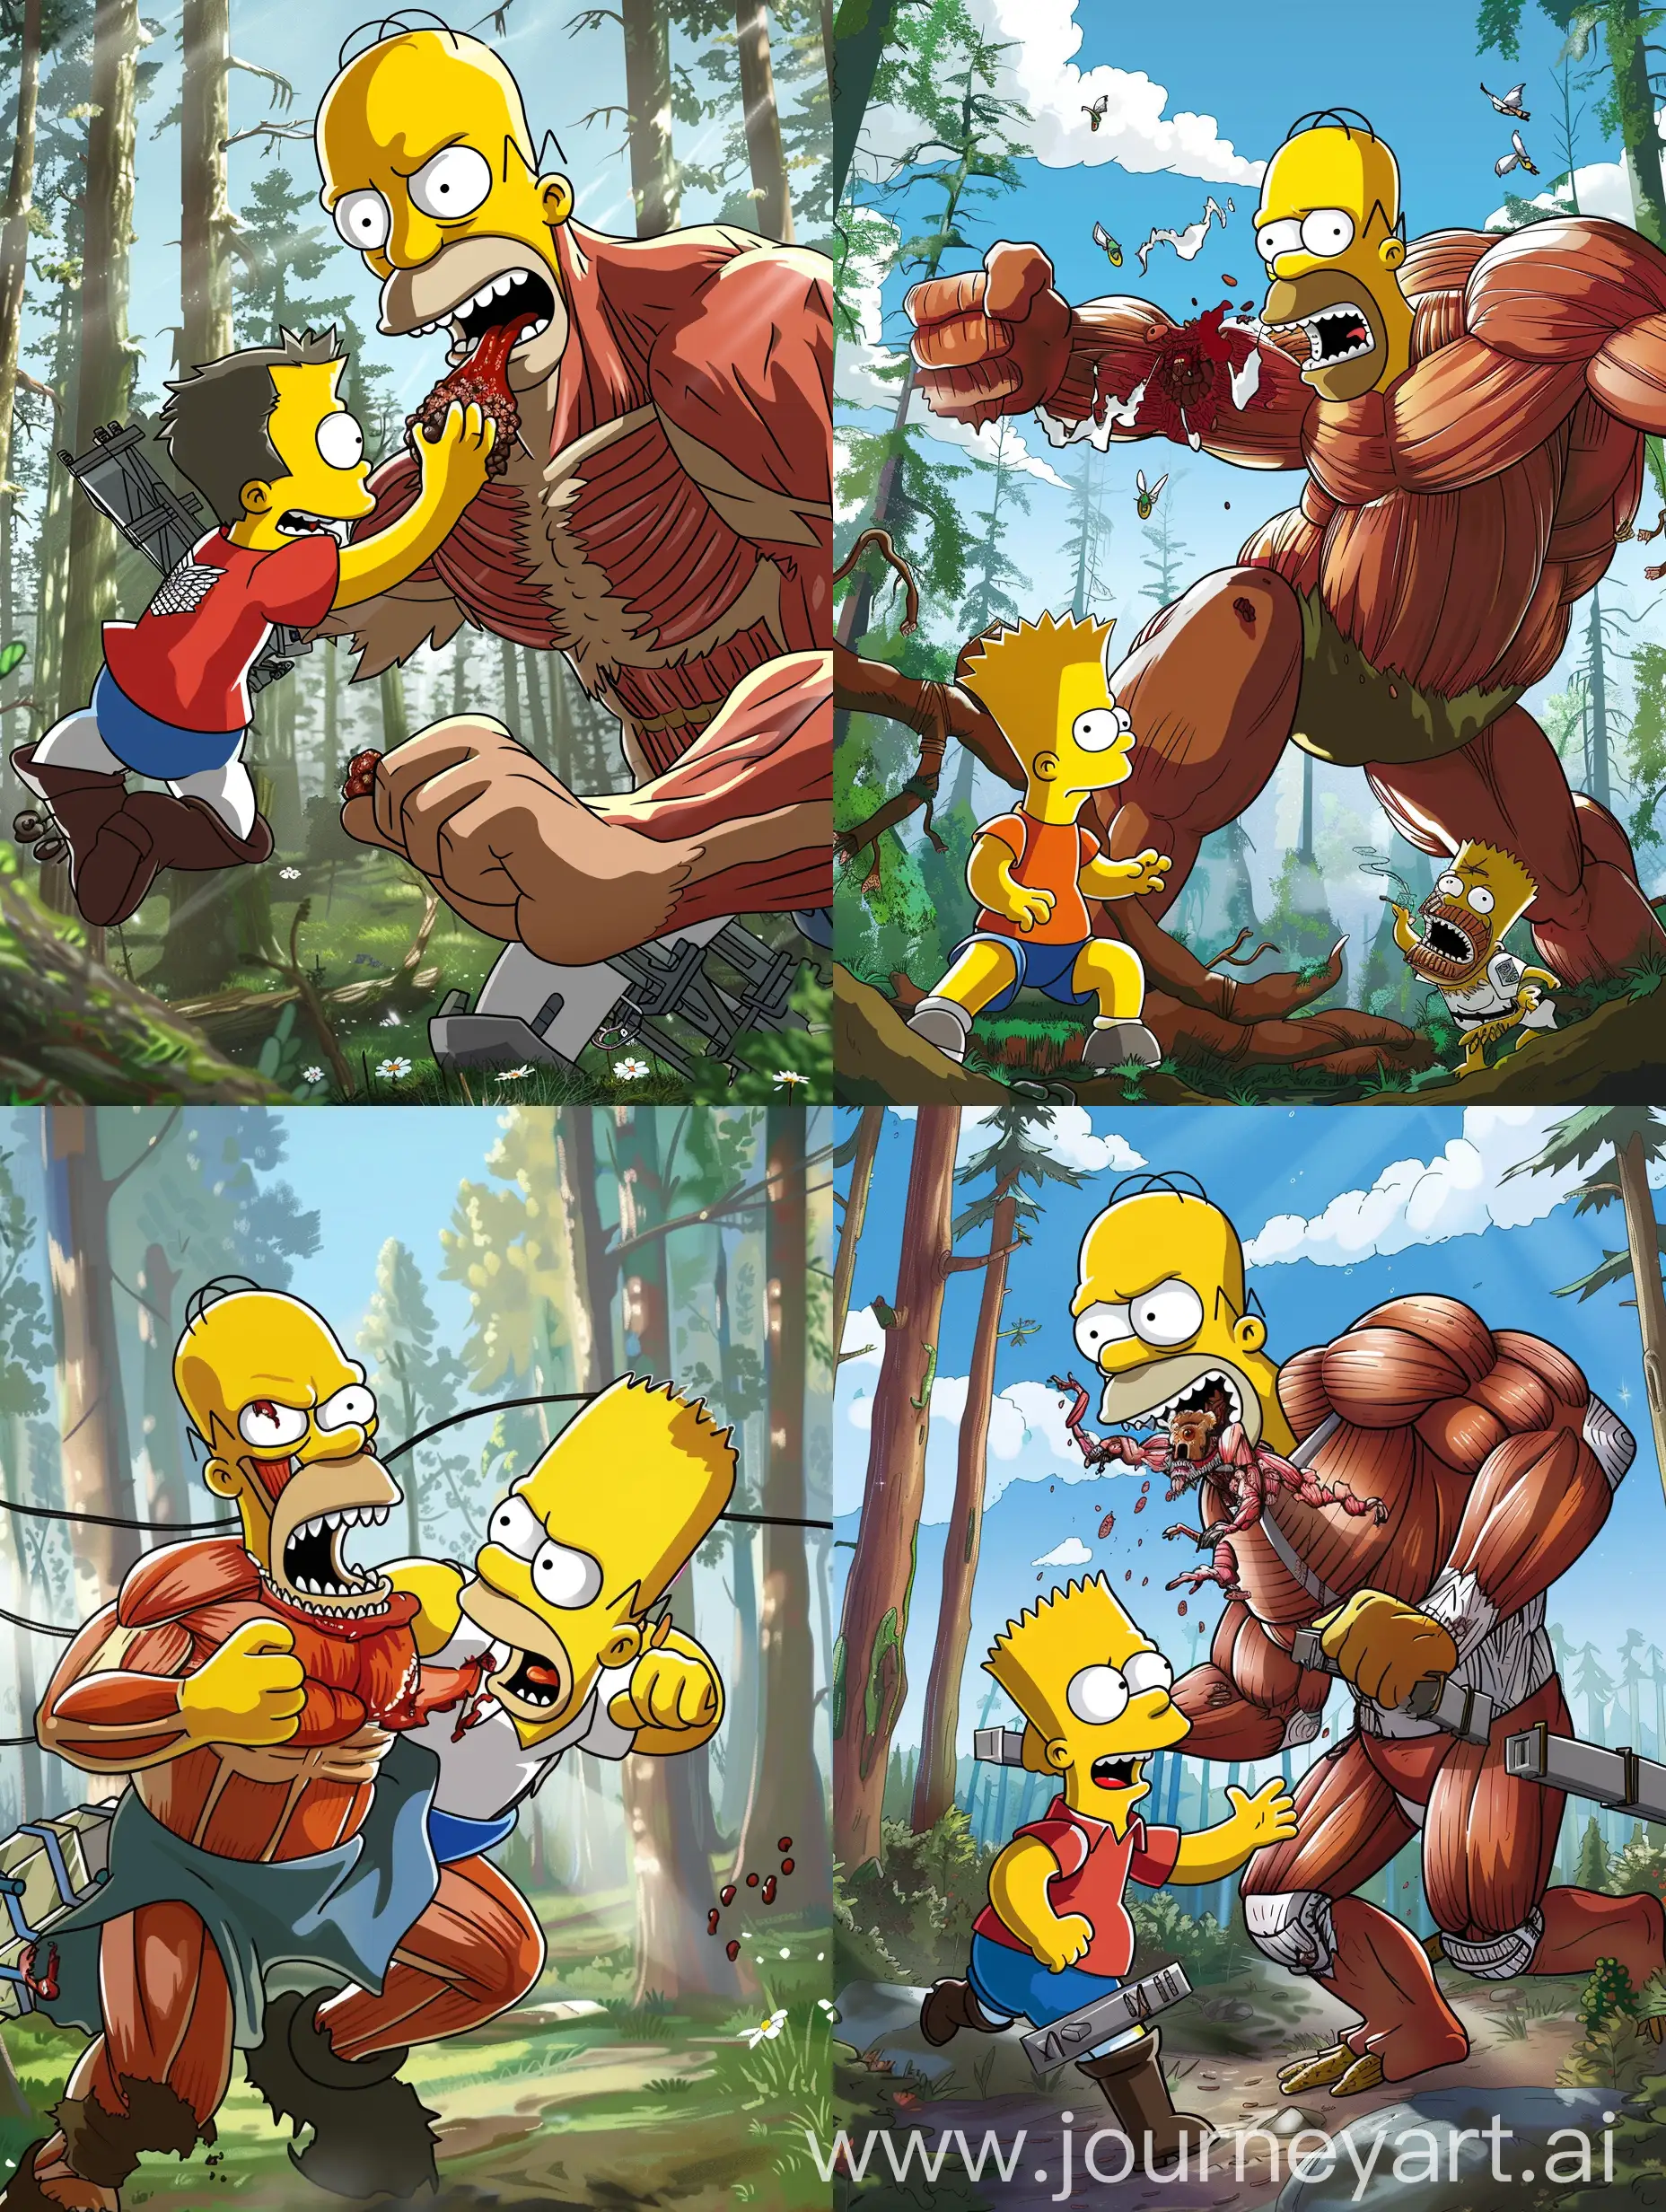 In the style of the simpsons, homer simpson as a titan in the attack of titan trying to eat bart after chasing him in the forest